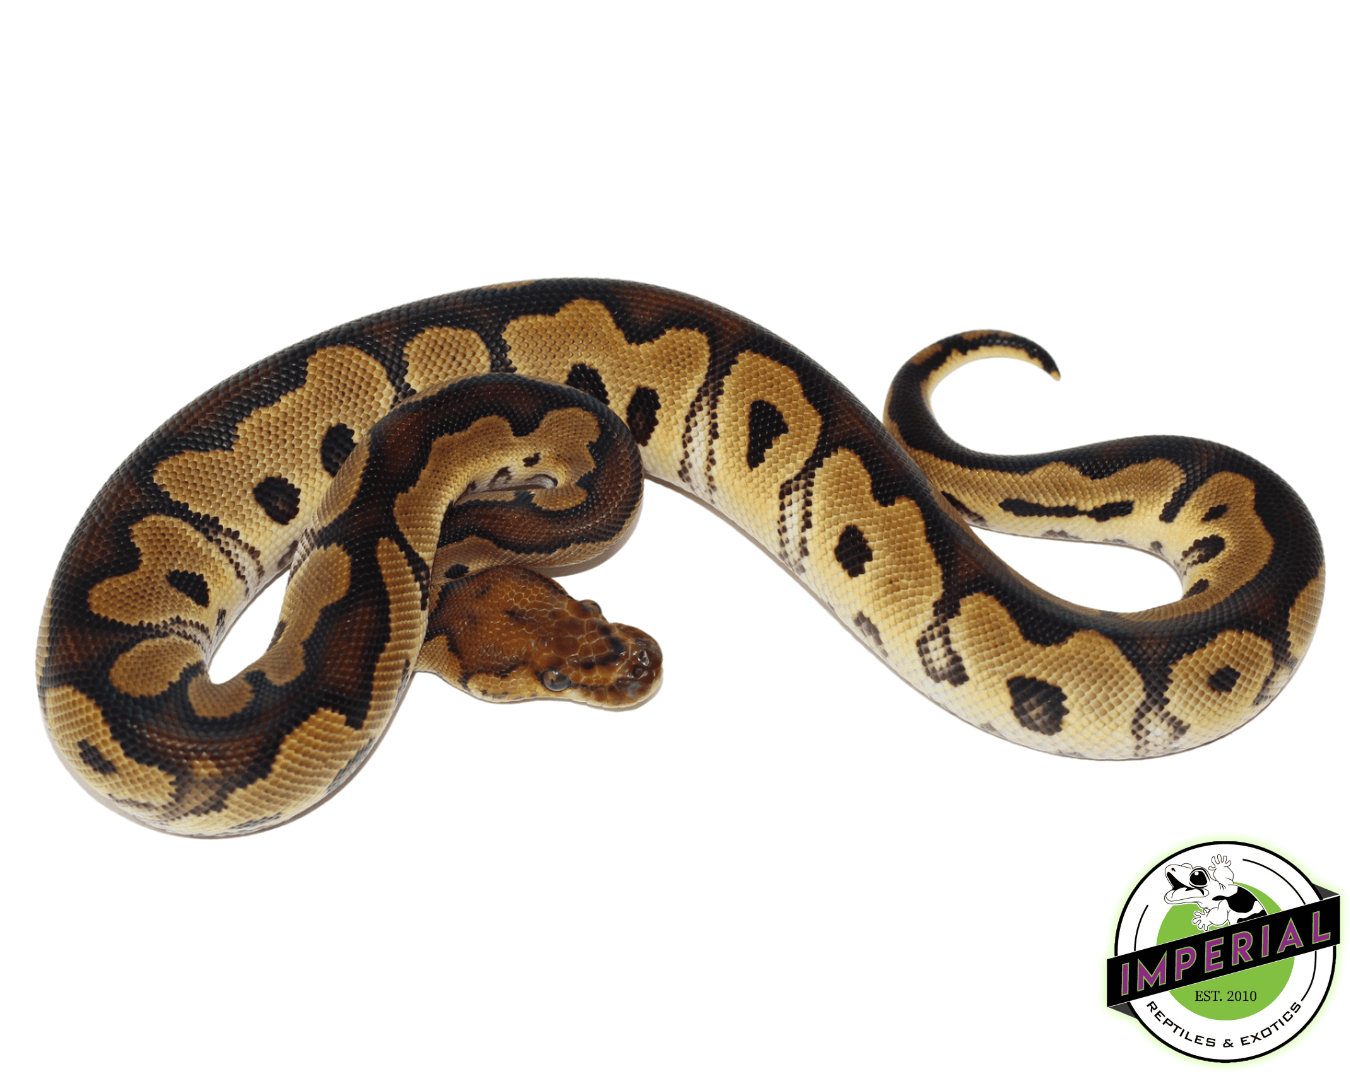 Yellowbelly Clown ball python for sale, buy reptiles online